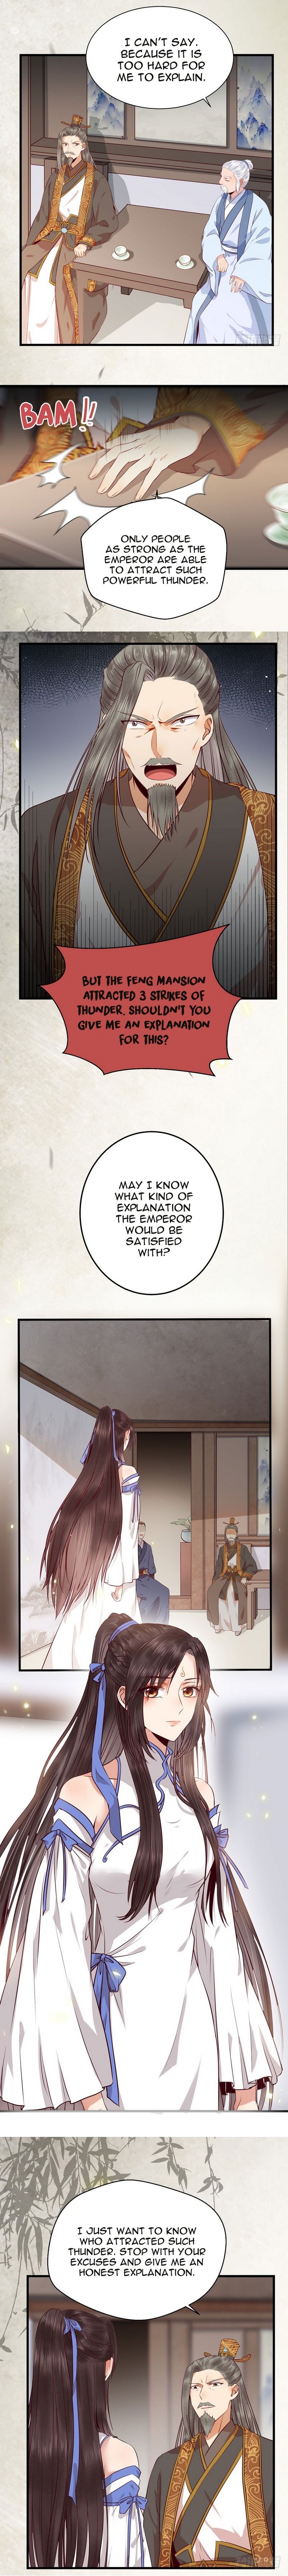 The Ghostly Doctor - Page 2